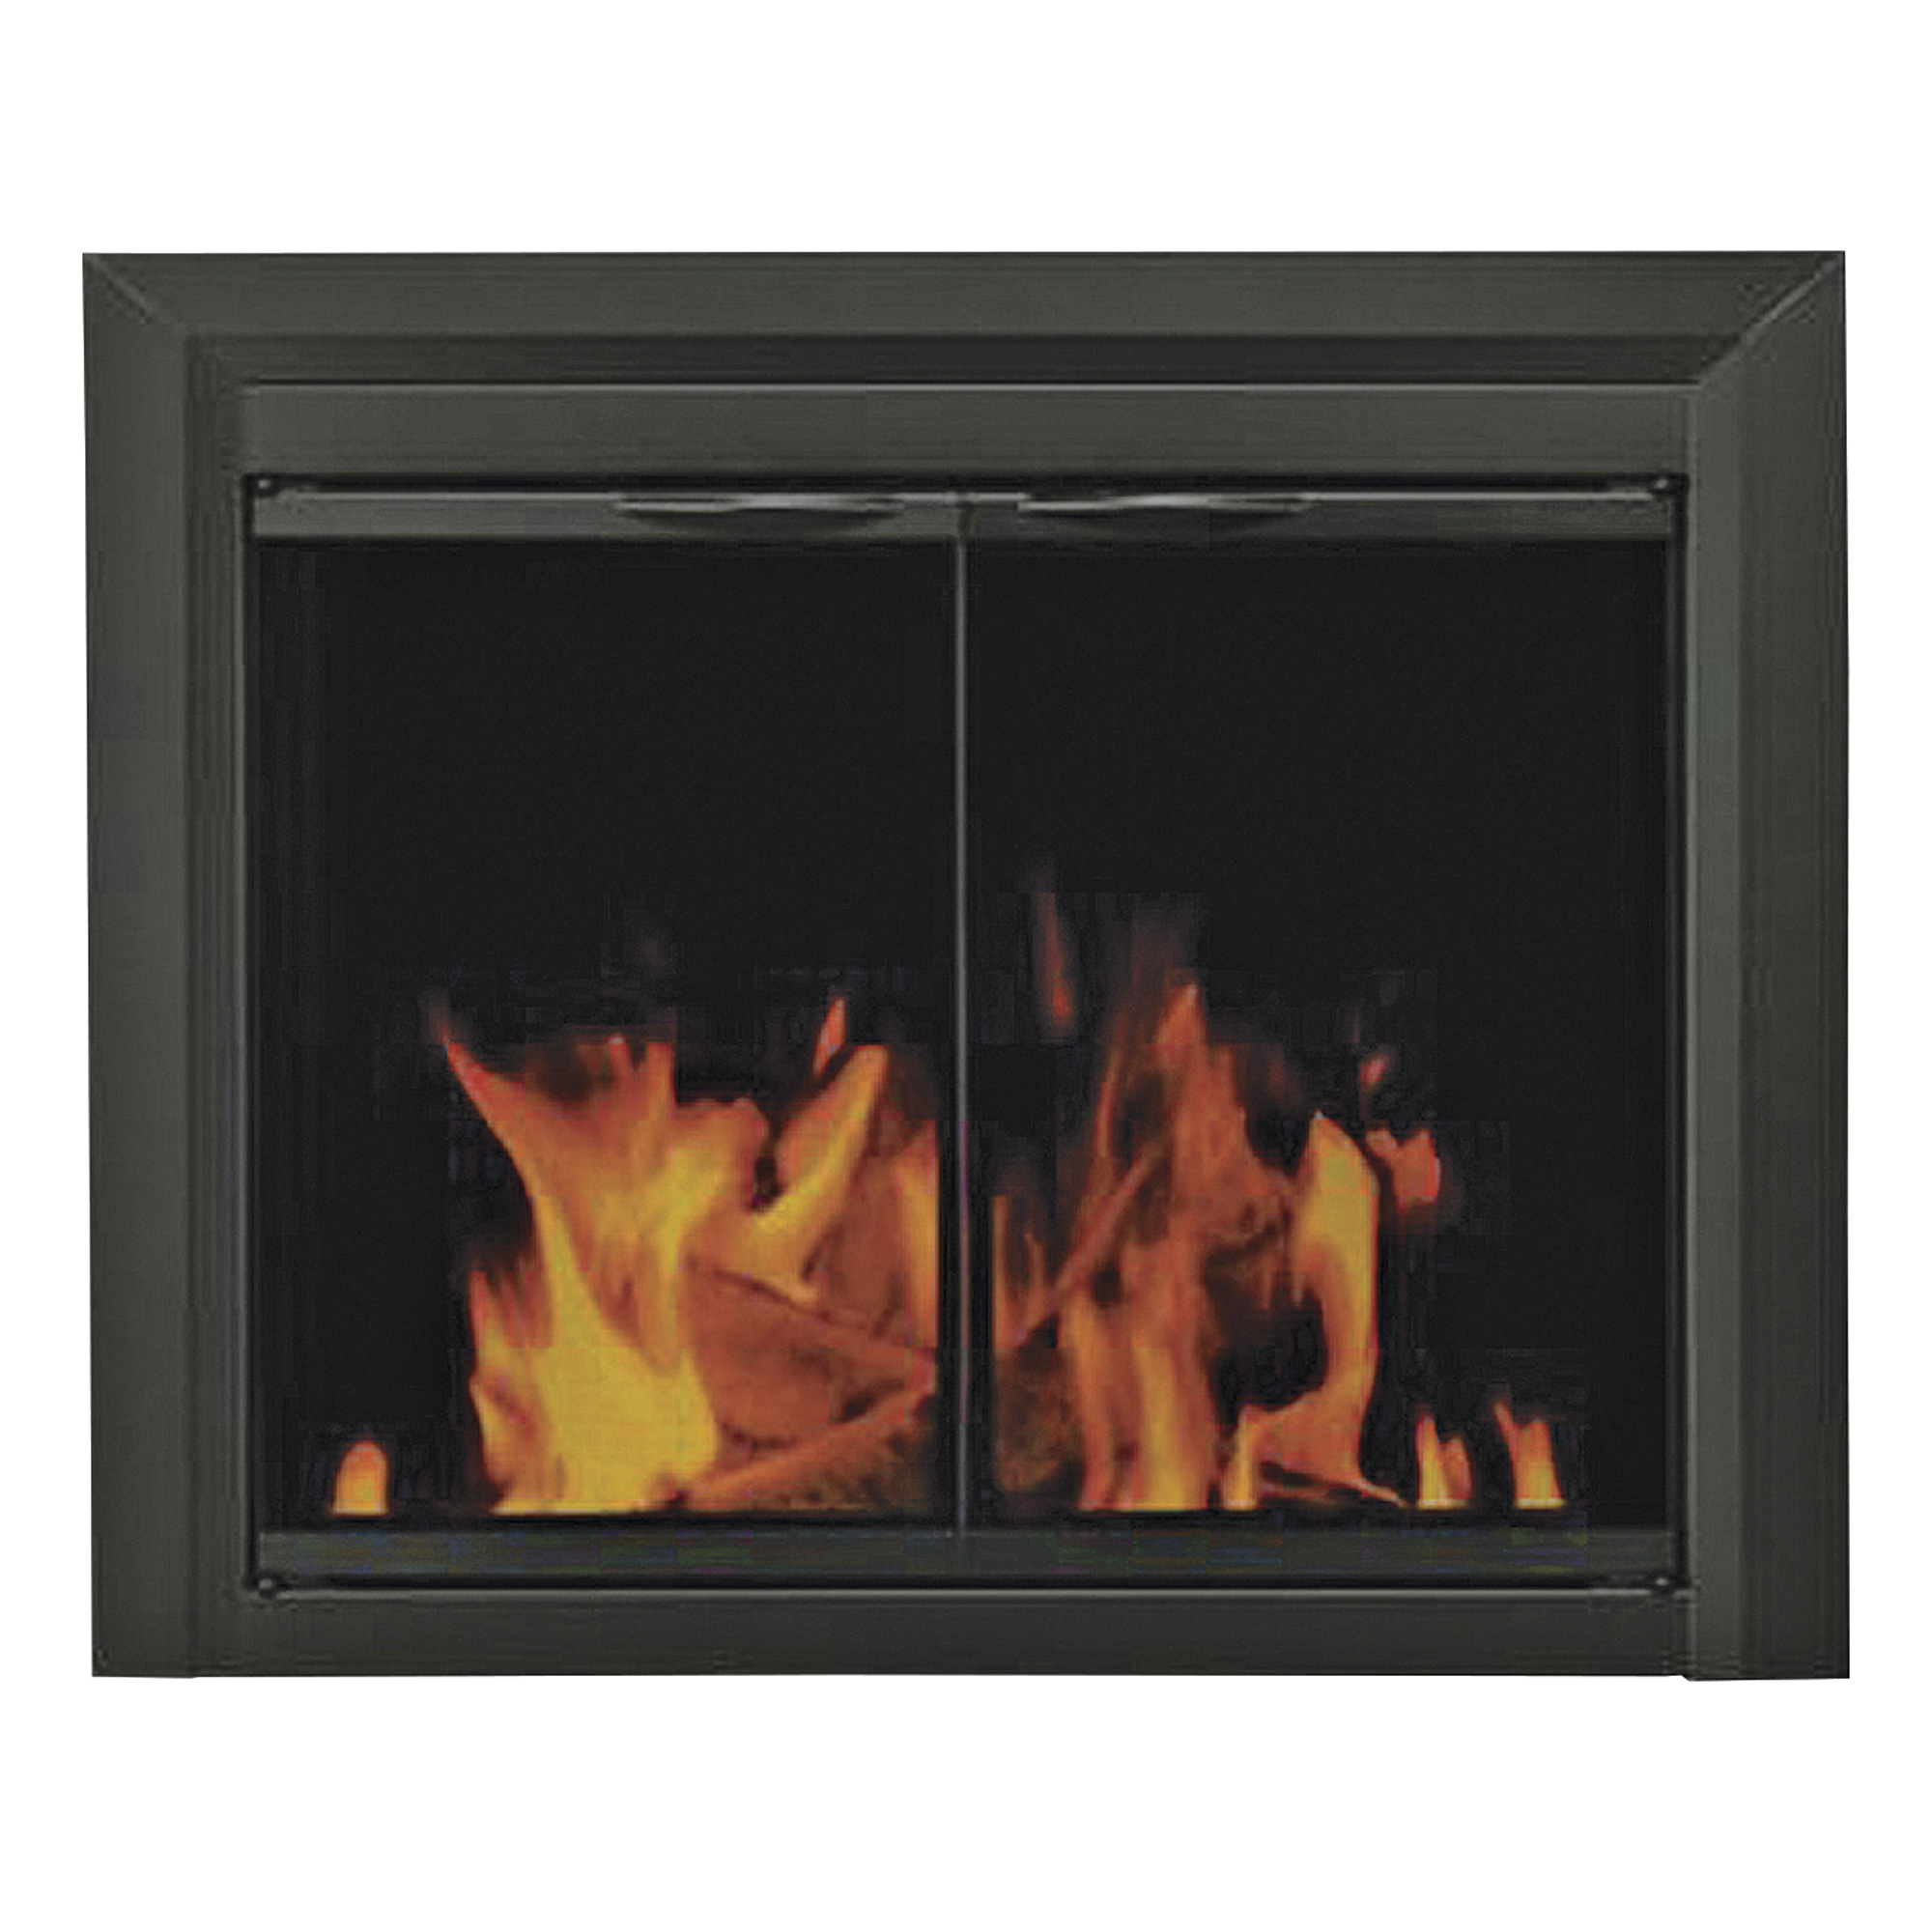 Pleasant Hearth Carlisle Fireplace Glass Door, For Masonry Fireplaces, Large, Black, Model CL-3002